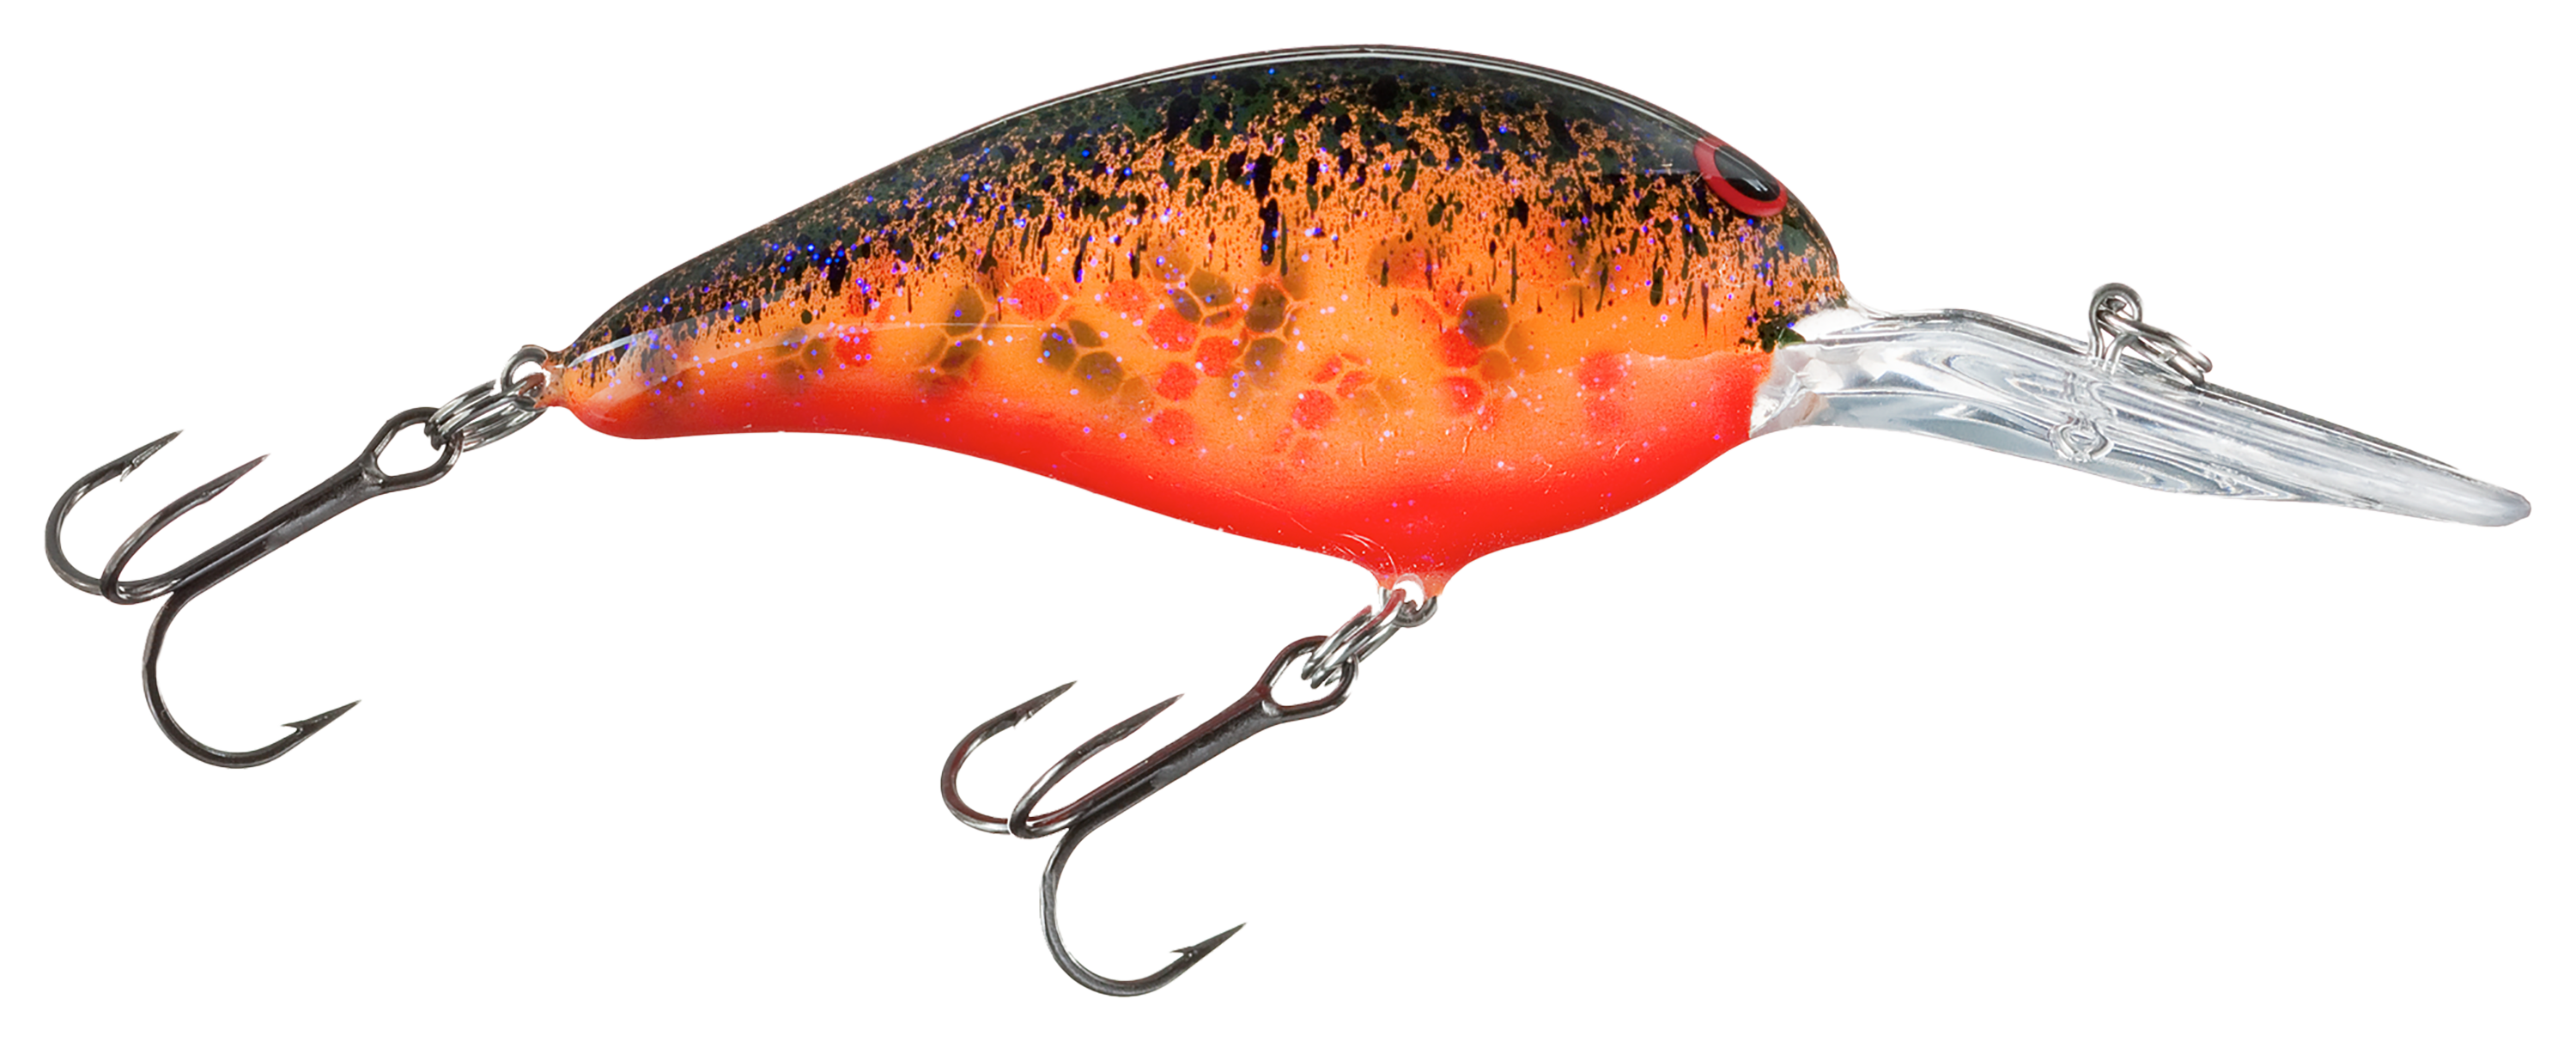 Norman Middle N  Crankbaits — Lake Pro Tackle